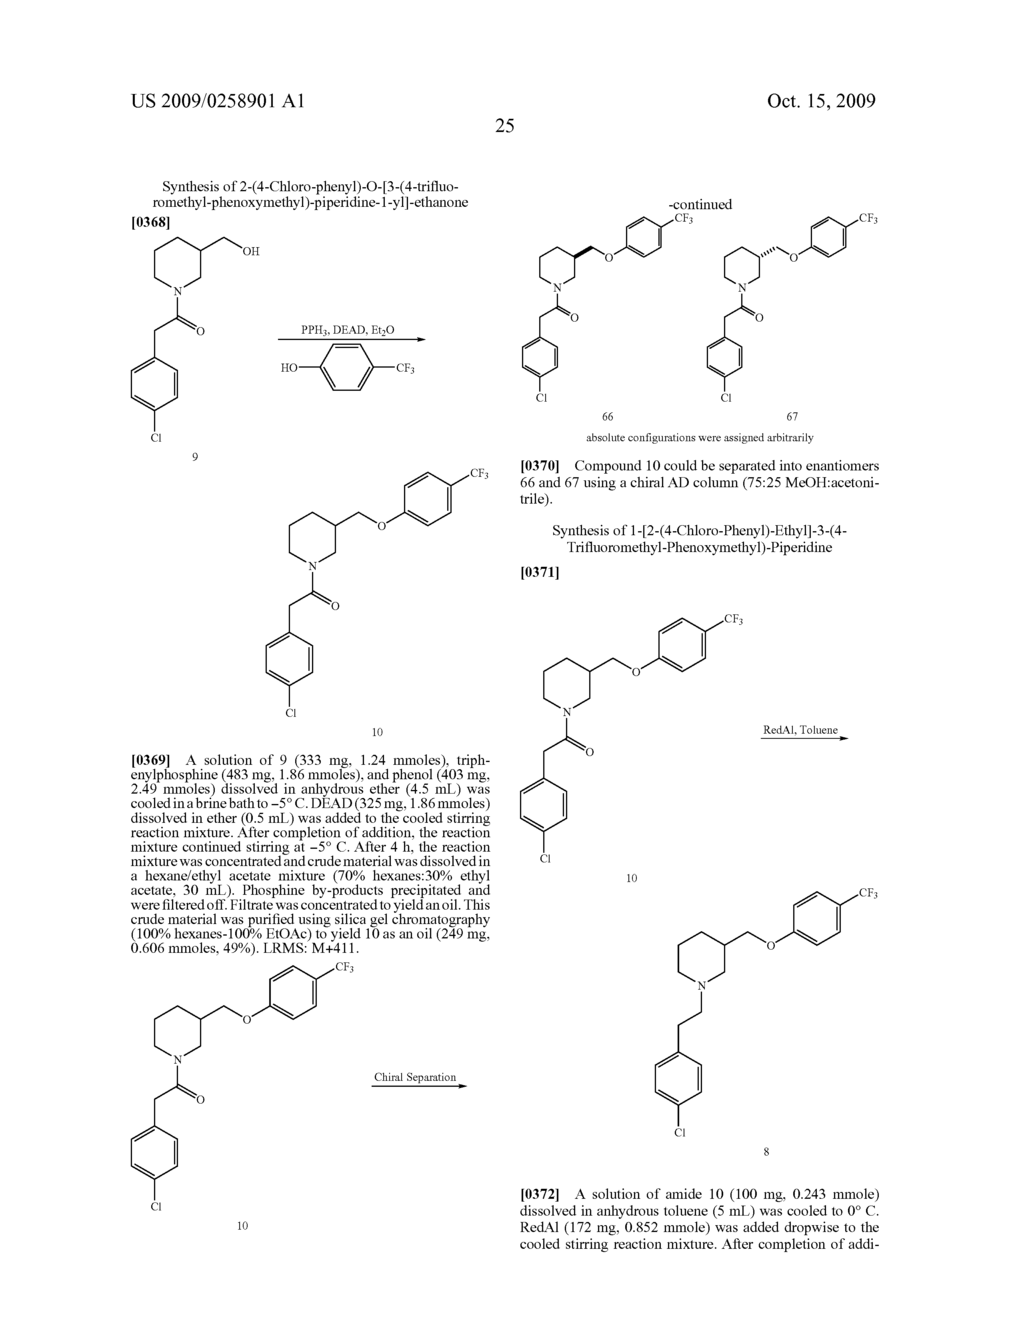 LIGANDS FOR MONOAMINE RECEPTORS AND TRANSPORTERS, AND METHODS OF USE THEREOF - diagram, schematic, and image 27